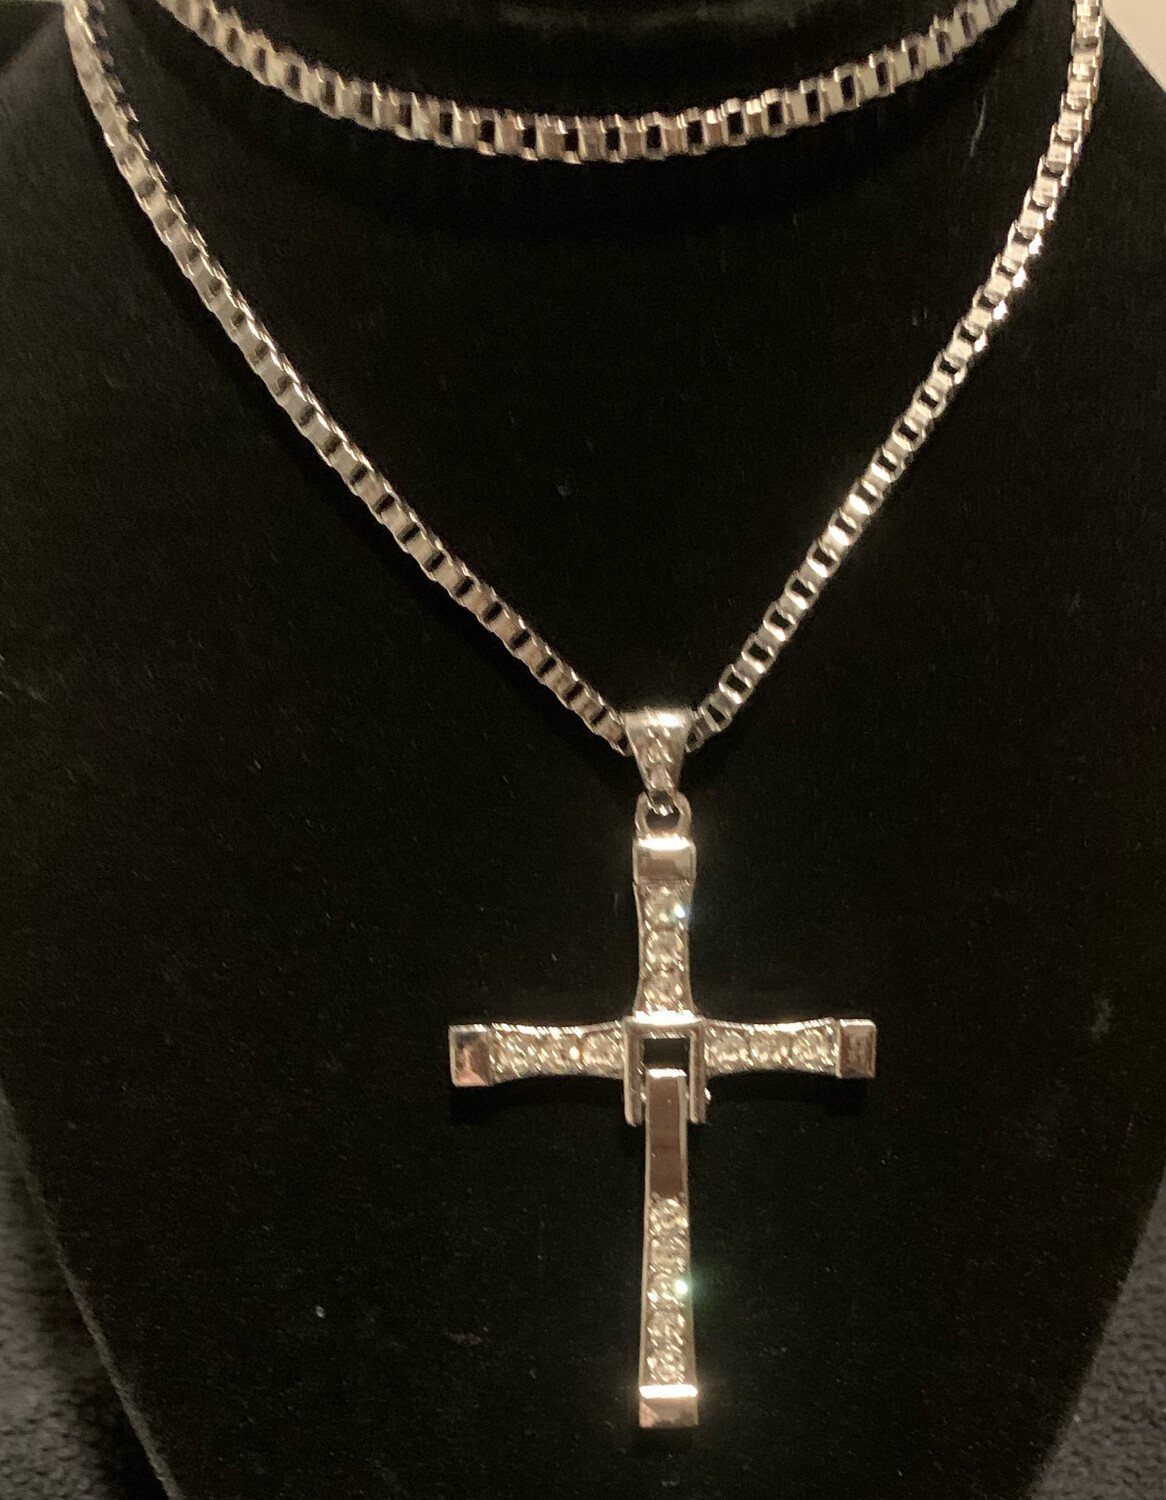 Large Size cross imitates The Fast and The Furious movie pendant.